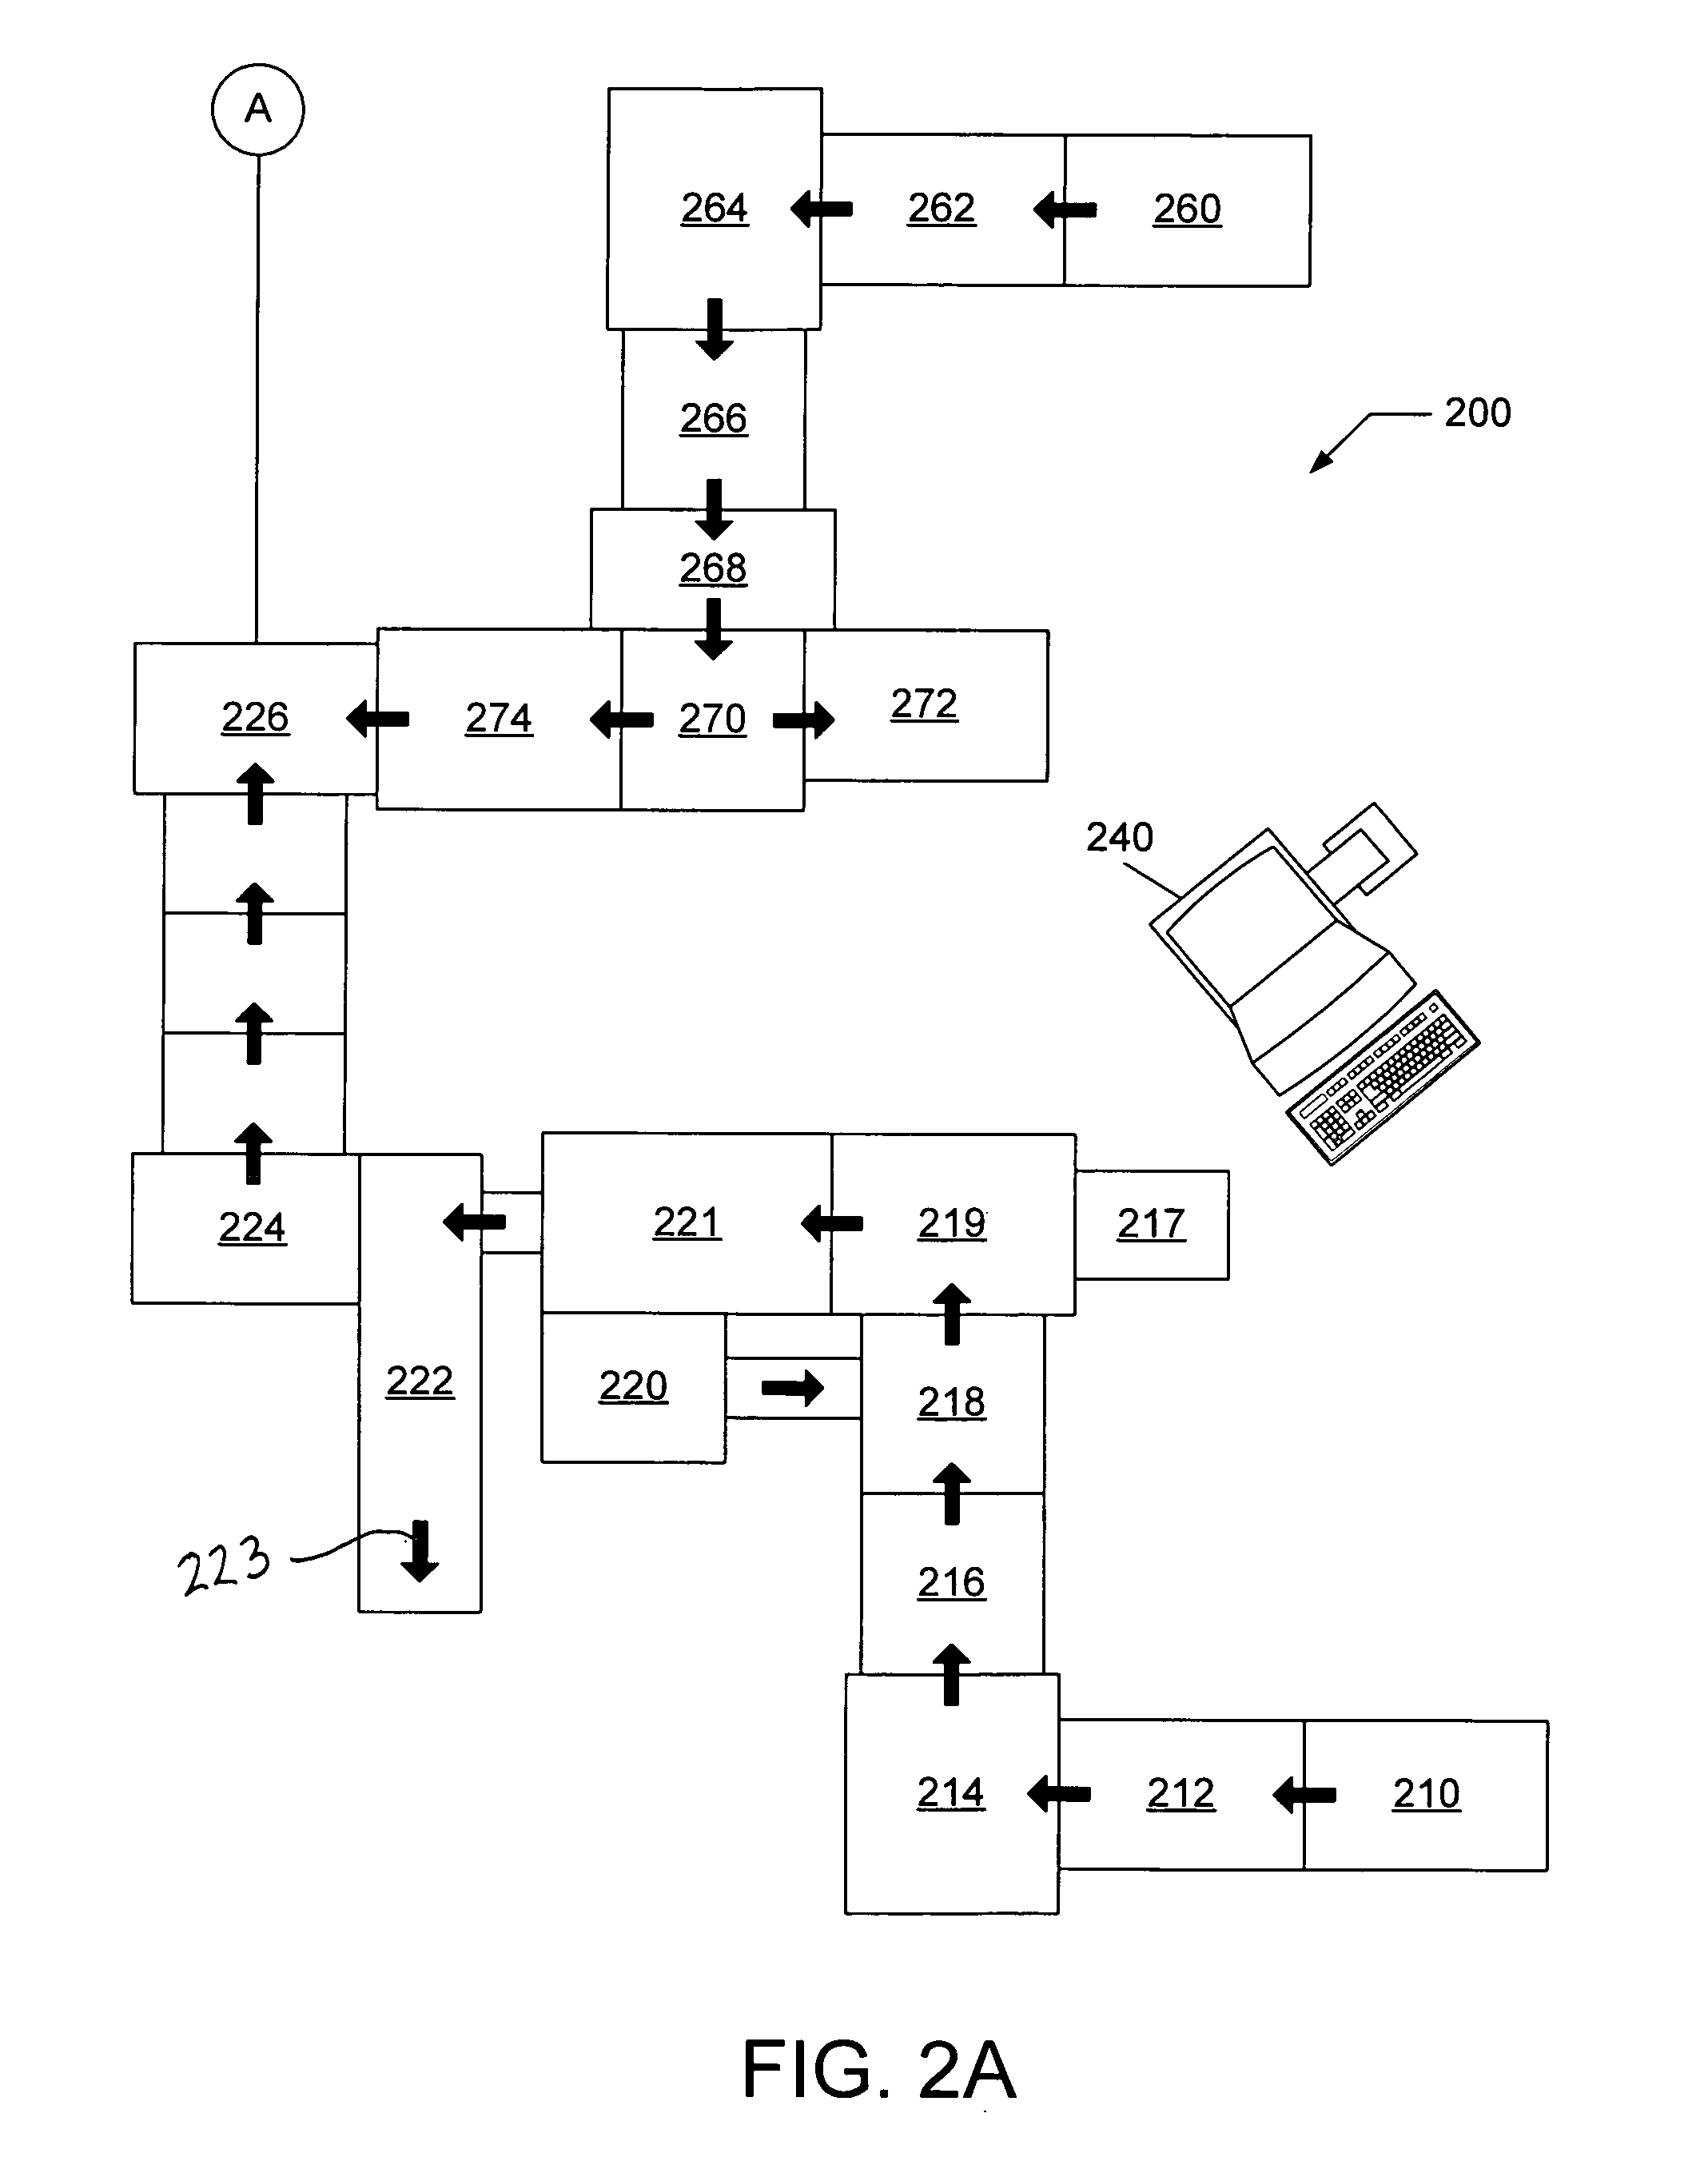 Presentation instrument insert systems and methods